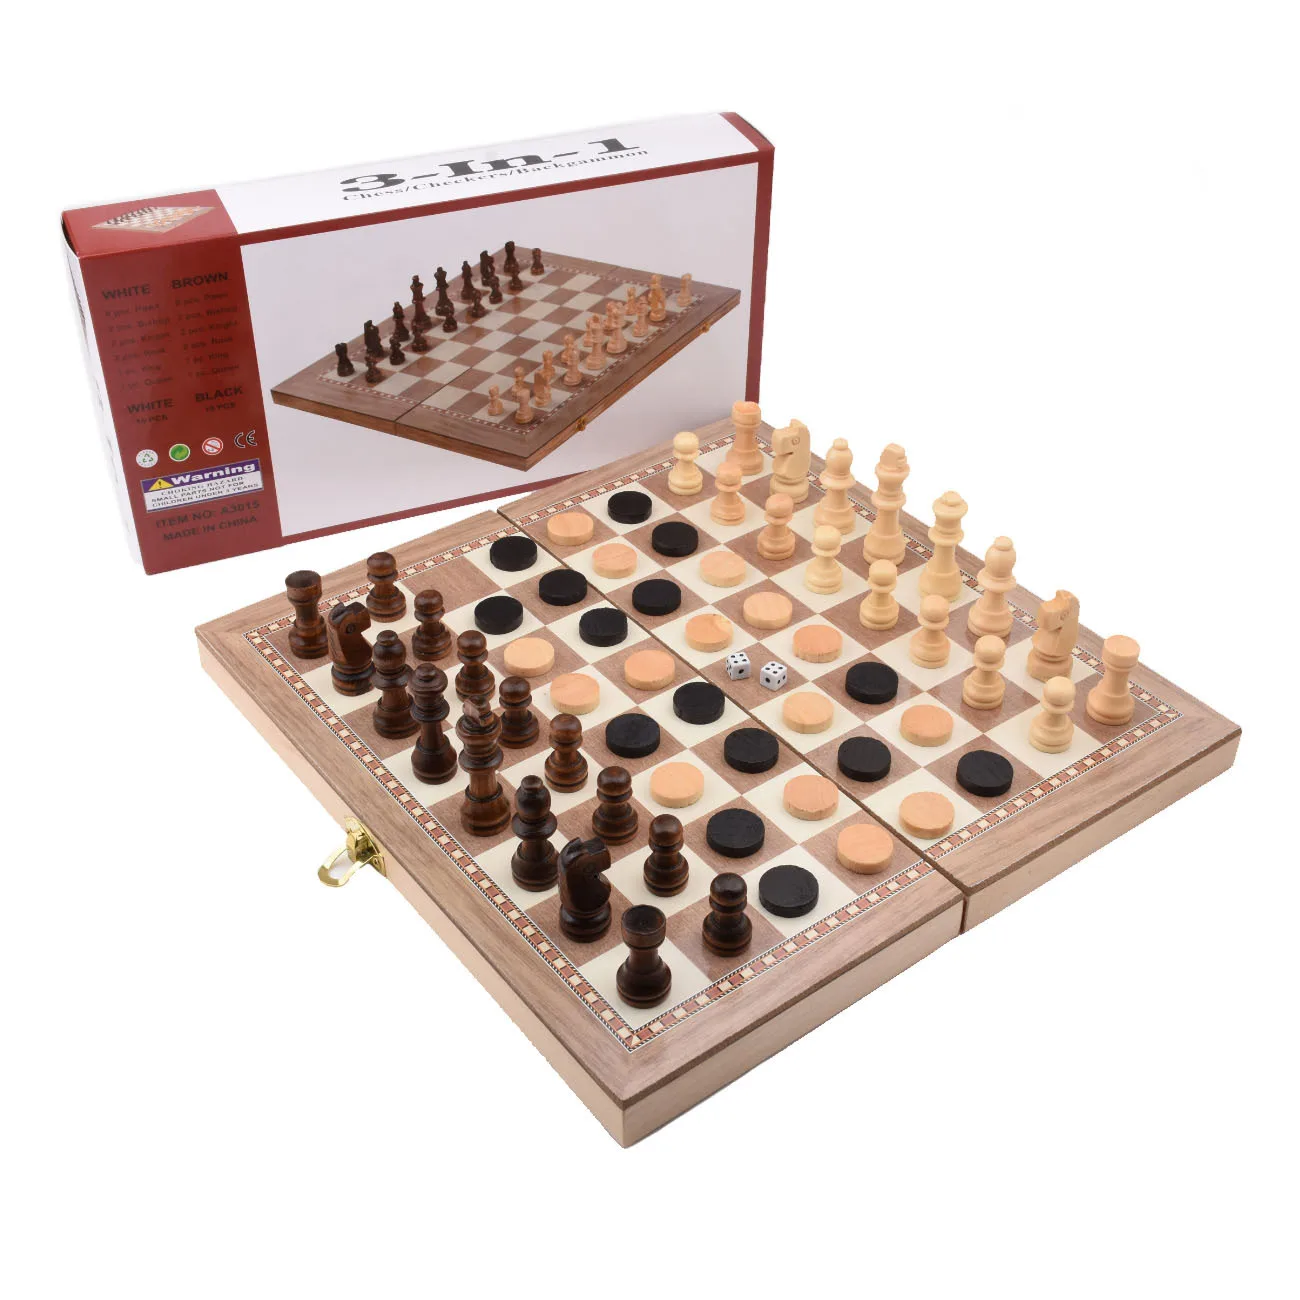 

Folding Wooden International Chess Checkers Set Foldable Board Game Funny Game Chessmen Collection Portable Board Game, Natural